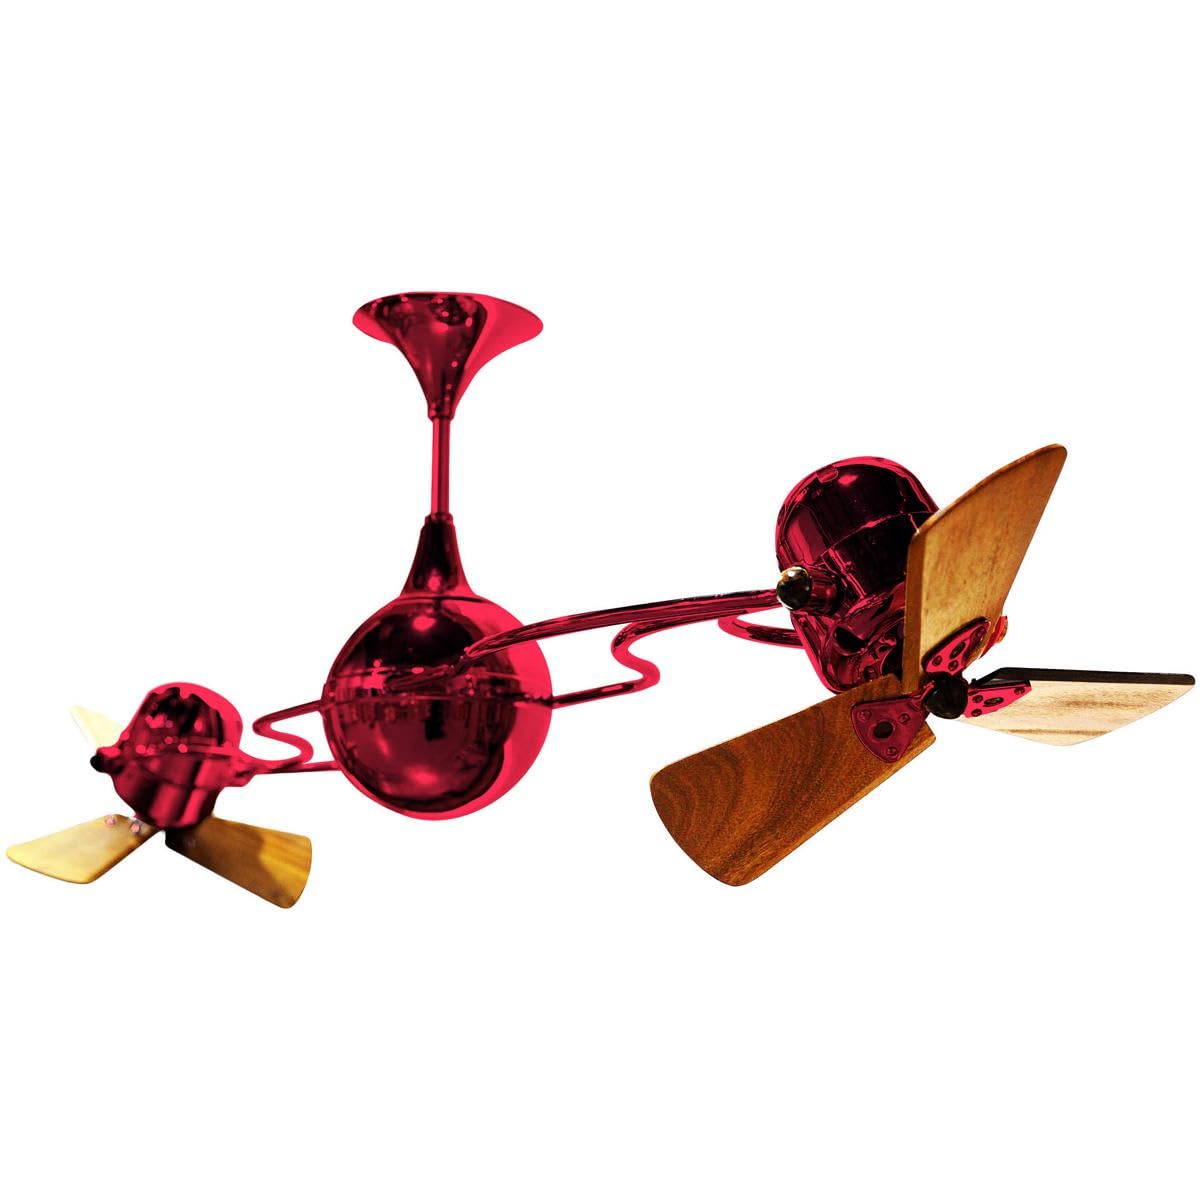 Matthews Fan IV-RED-WD Italo Ventania 360° dual headed rotational ceiling fan in  Rubi (Red) finish with solid sustainable mahogany wood blades.